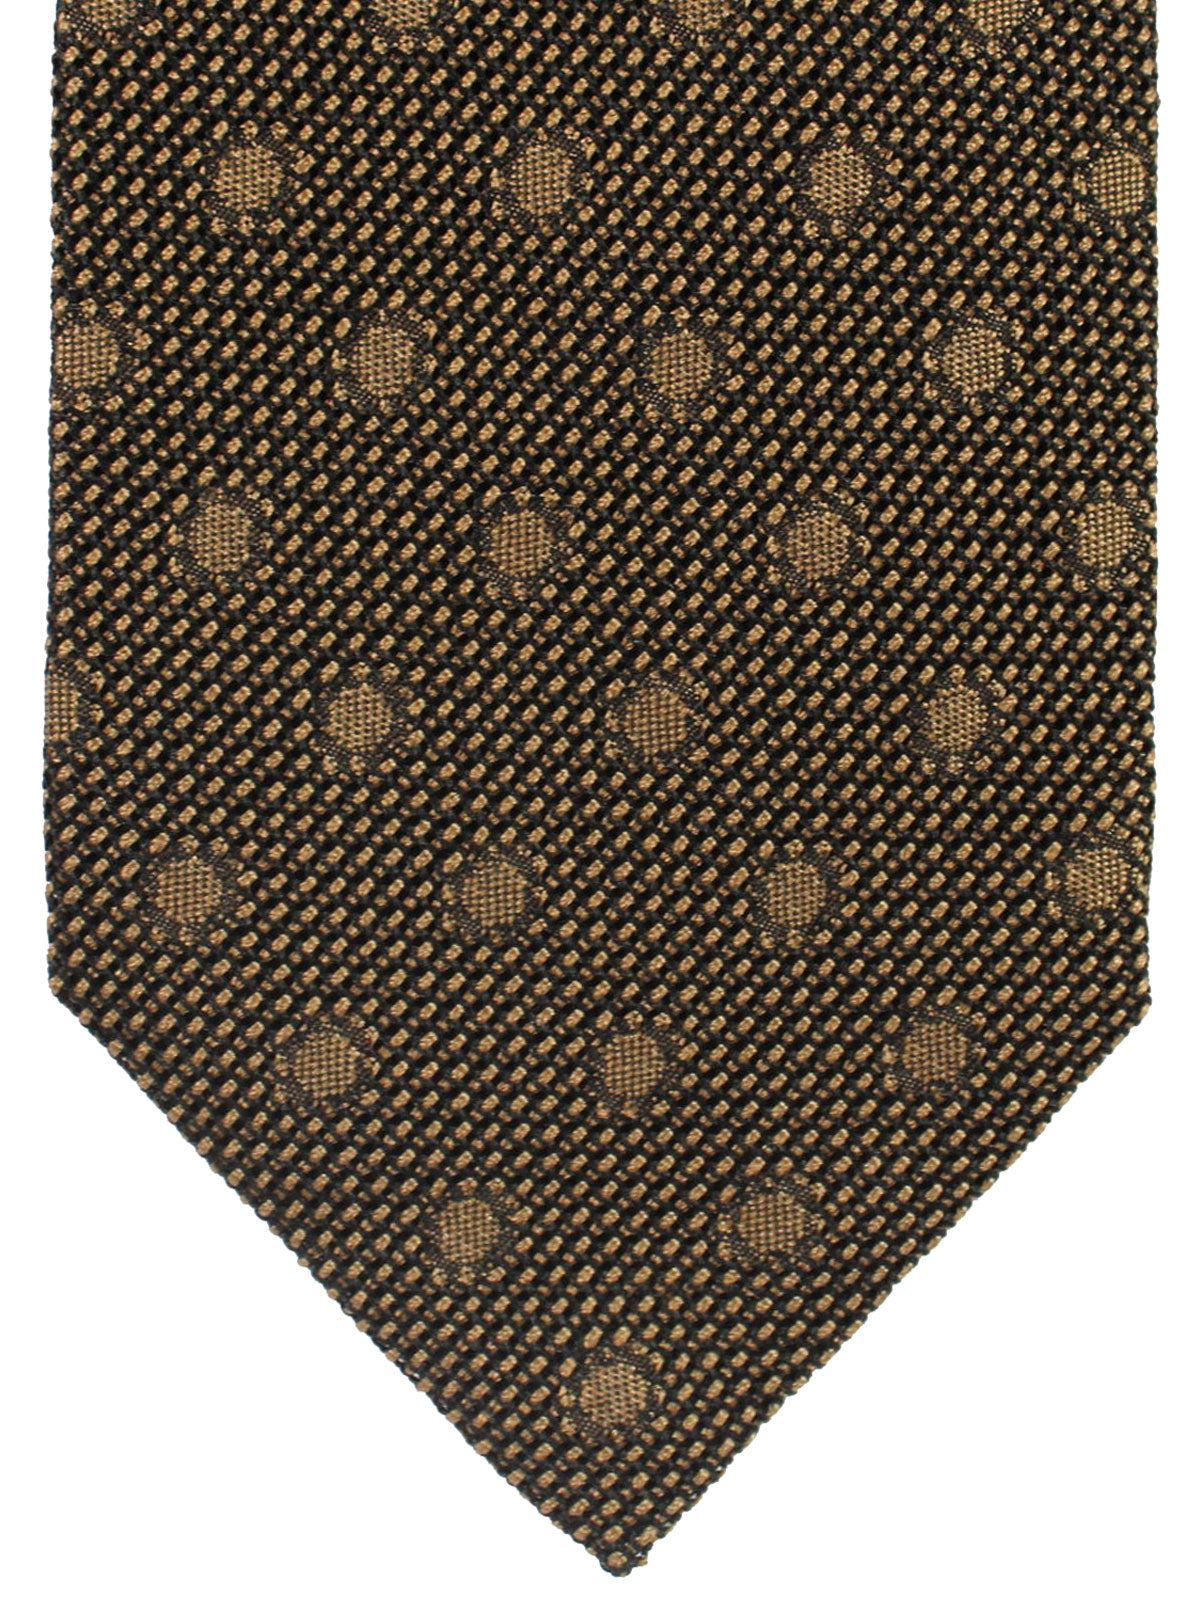 Tom Ford Tie Brown Black Polka Dots Hand Made In Italy